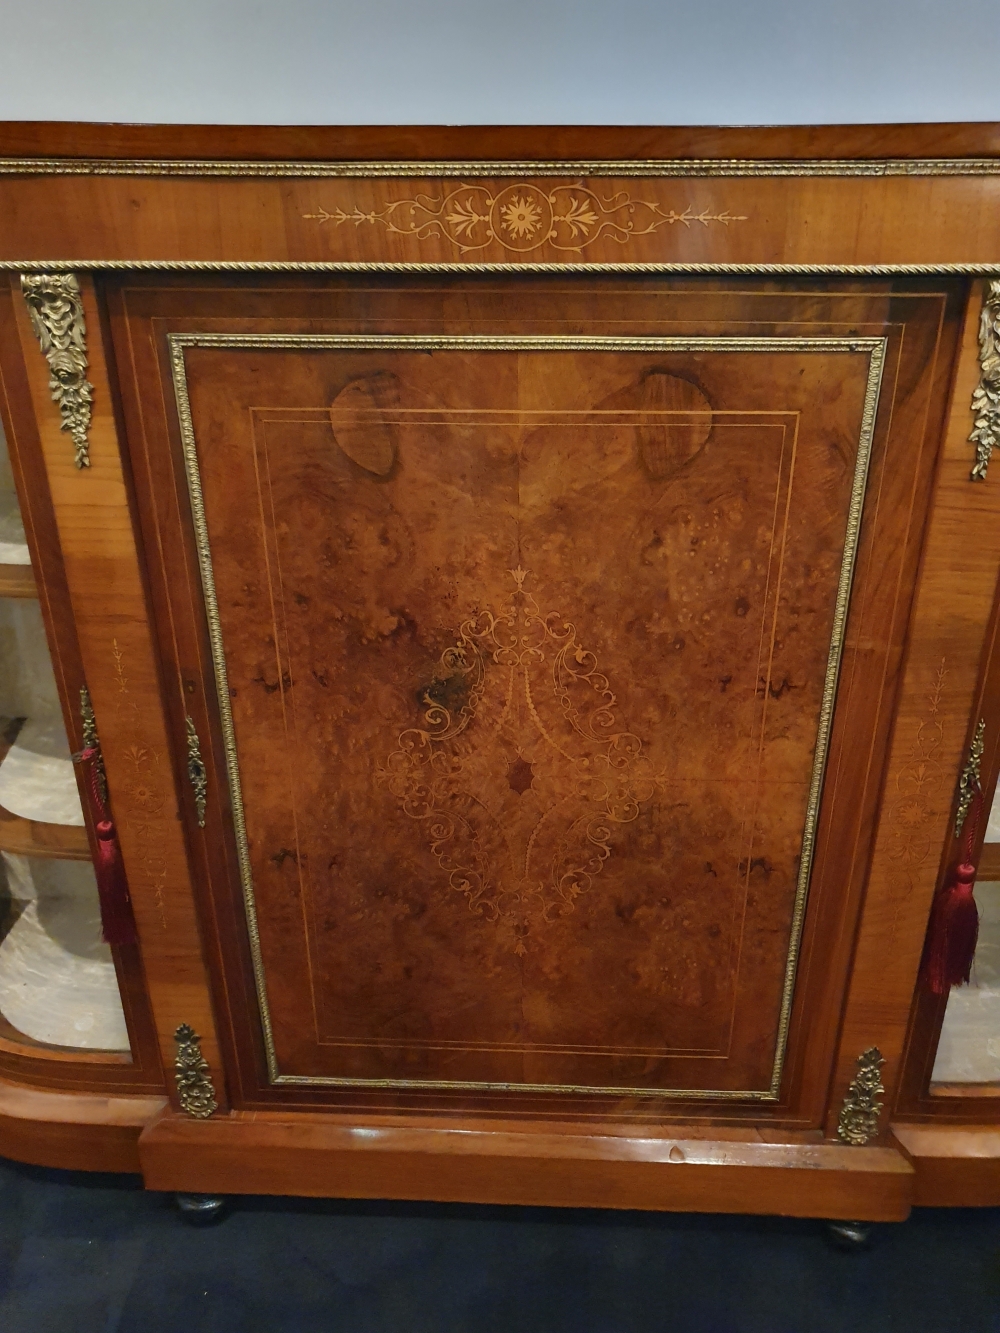 A STUNNING 19TH CENTURY BURR WALNUT CREDENZA, circa 1860, with beautiful burr walnut and good qualit - Image 2 of 3